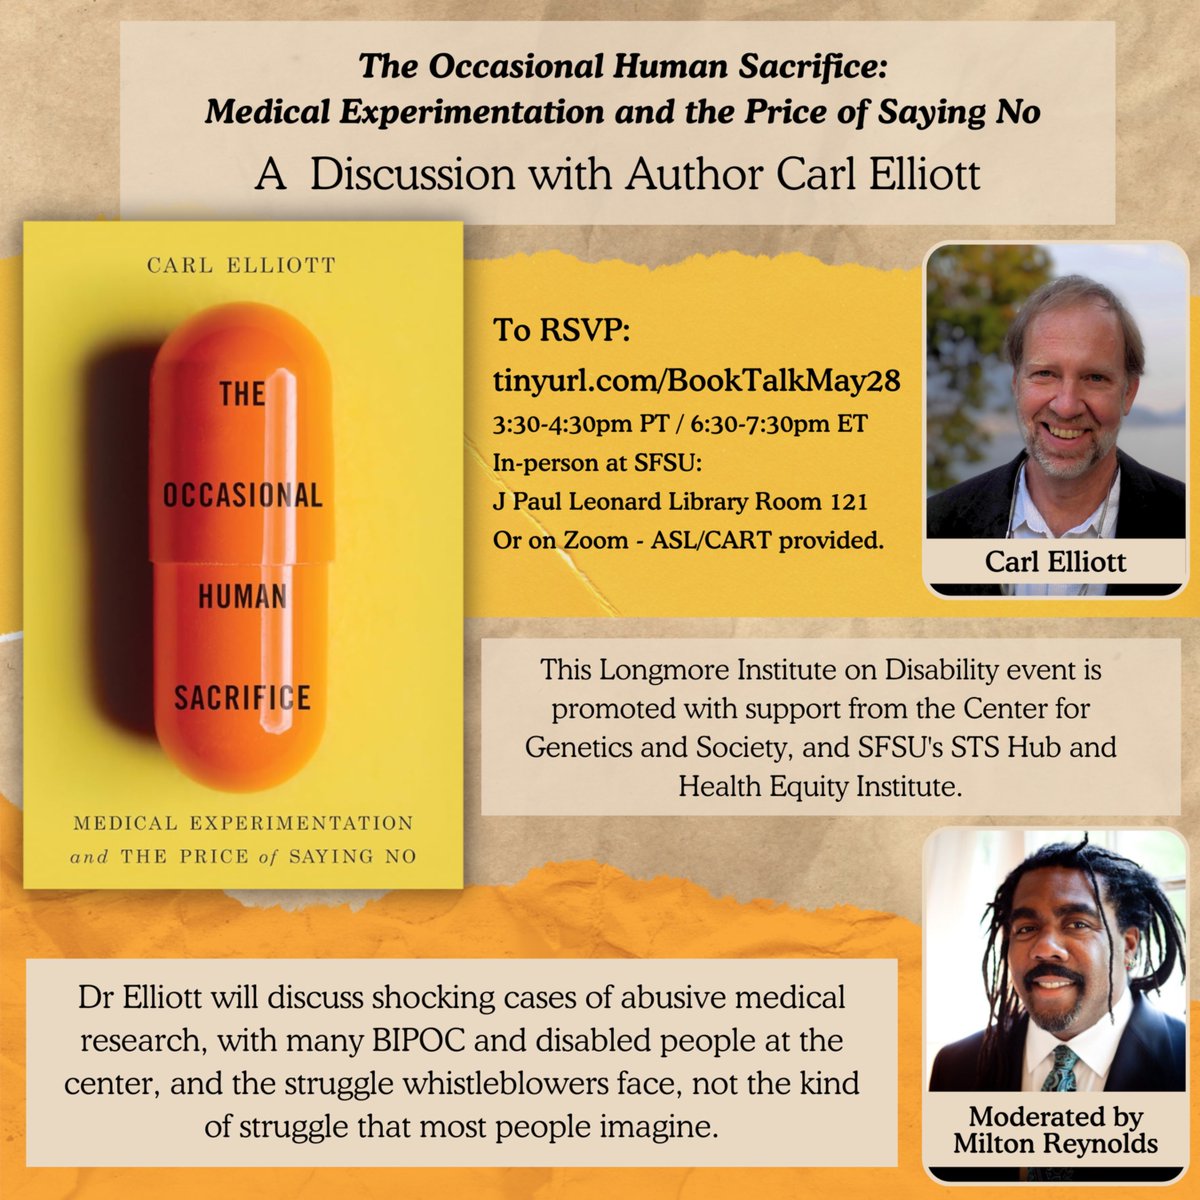 Please join us for this exciting event! Dr. Carl Elliott will discuss his new book, The Occasional Human Sacrifice: Medical Experimentation and the Price of Saying No. We will give away ten copies of the book to attendees! Learn more and register at tinyurl.com/BookTalkMay28